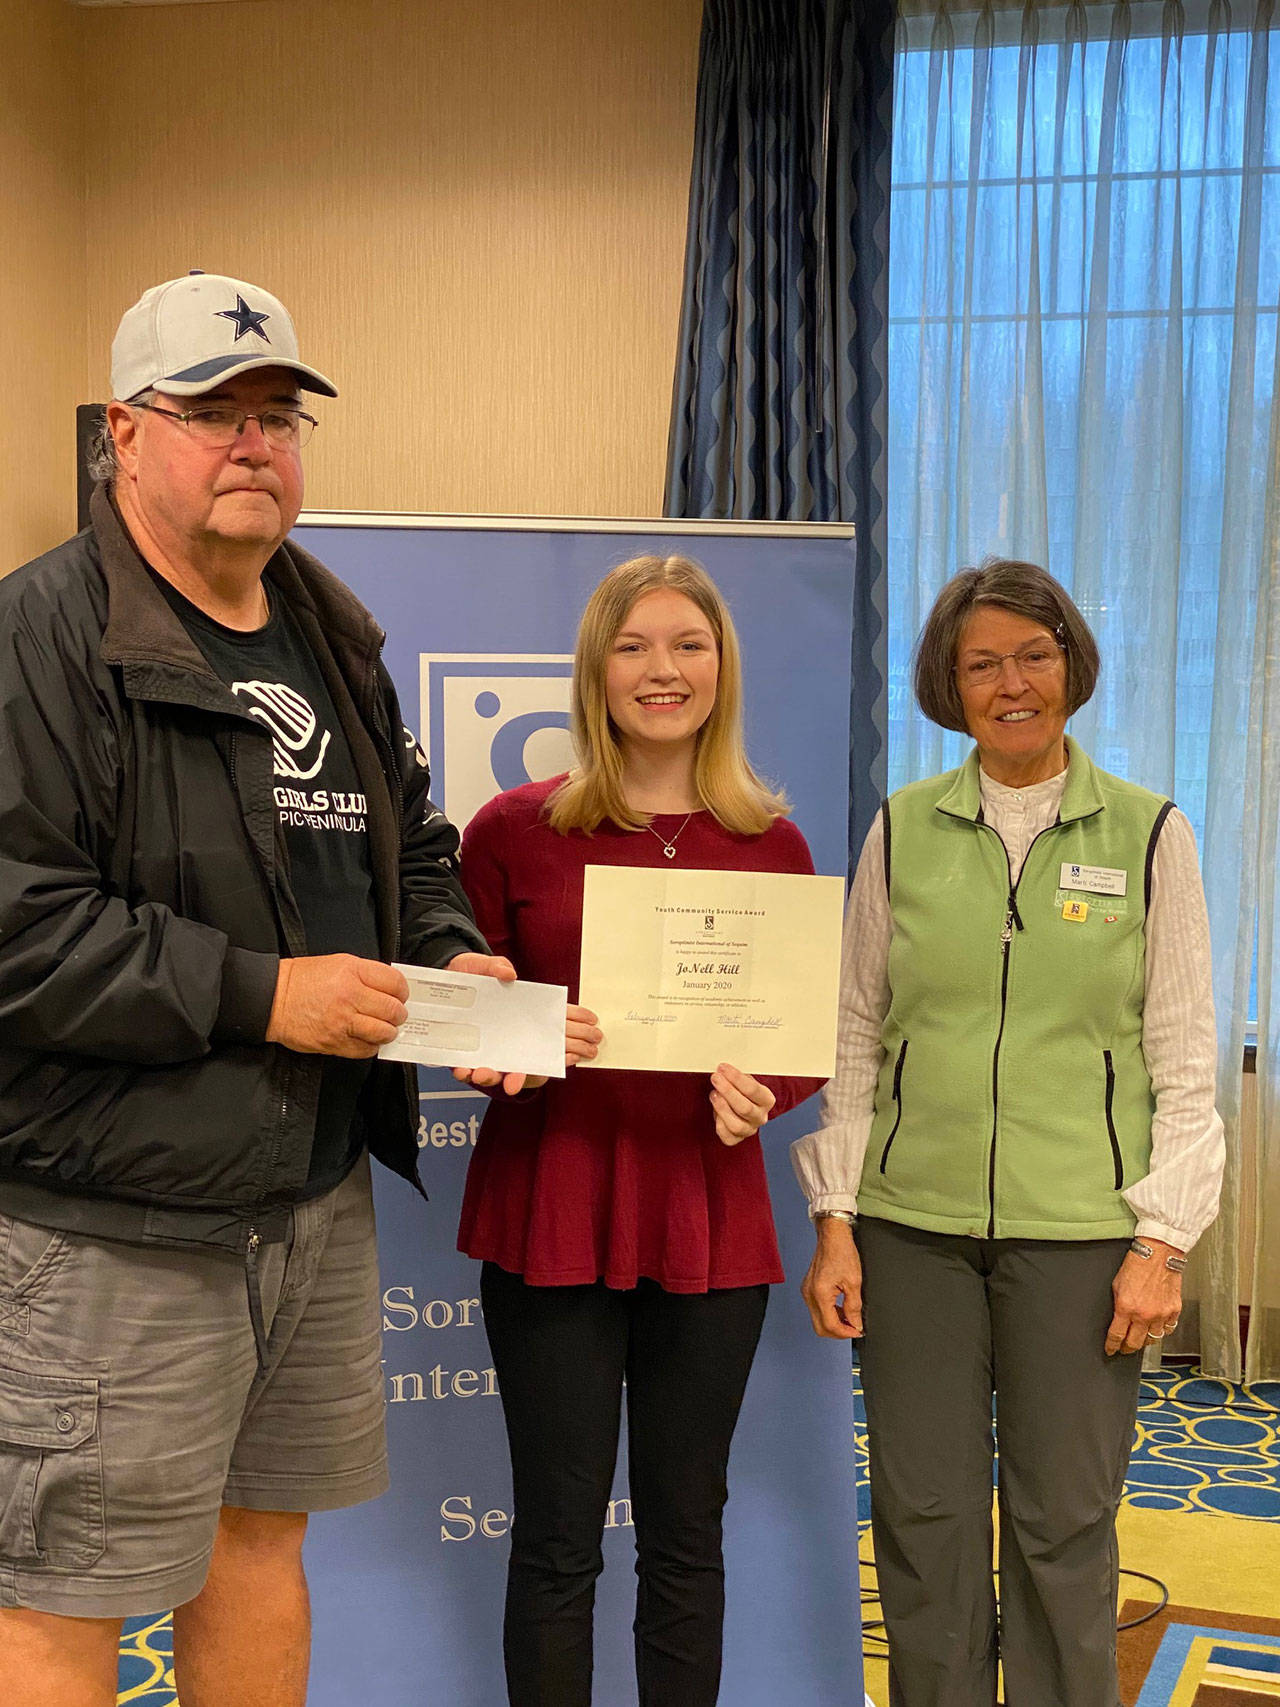 Pictured, from left, are Stephen Rosales and Jonell Hill receiving the Soroptimist International of Sequim’a Youth Community Award on behalf of the food bank, presented by Marti Campbell, a member of Soroptimist International of Sequim. Submitted photo